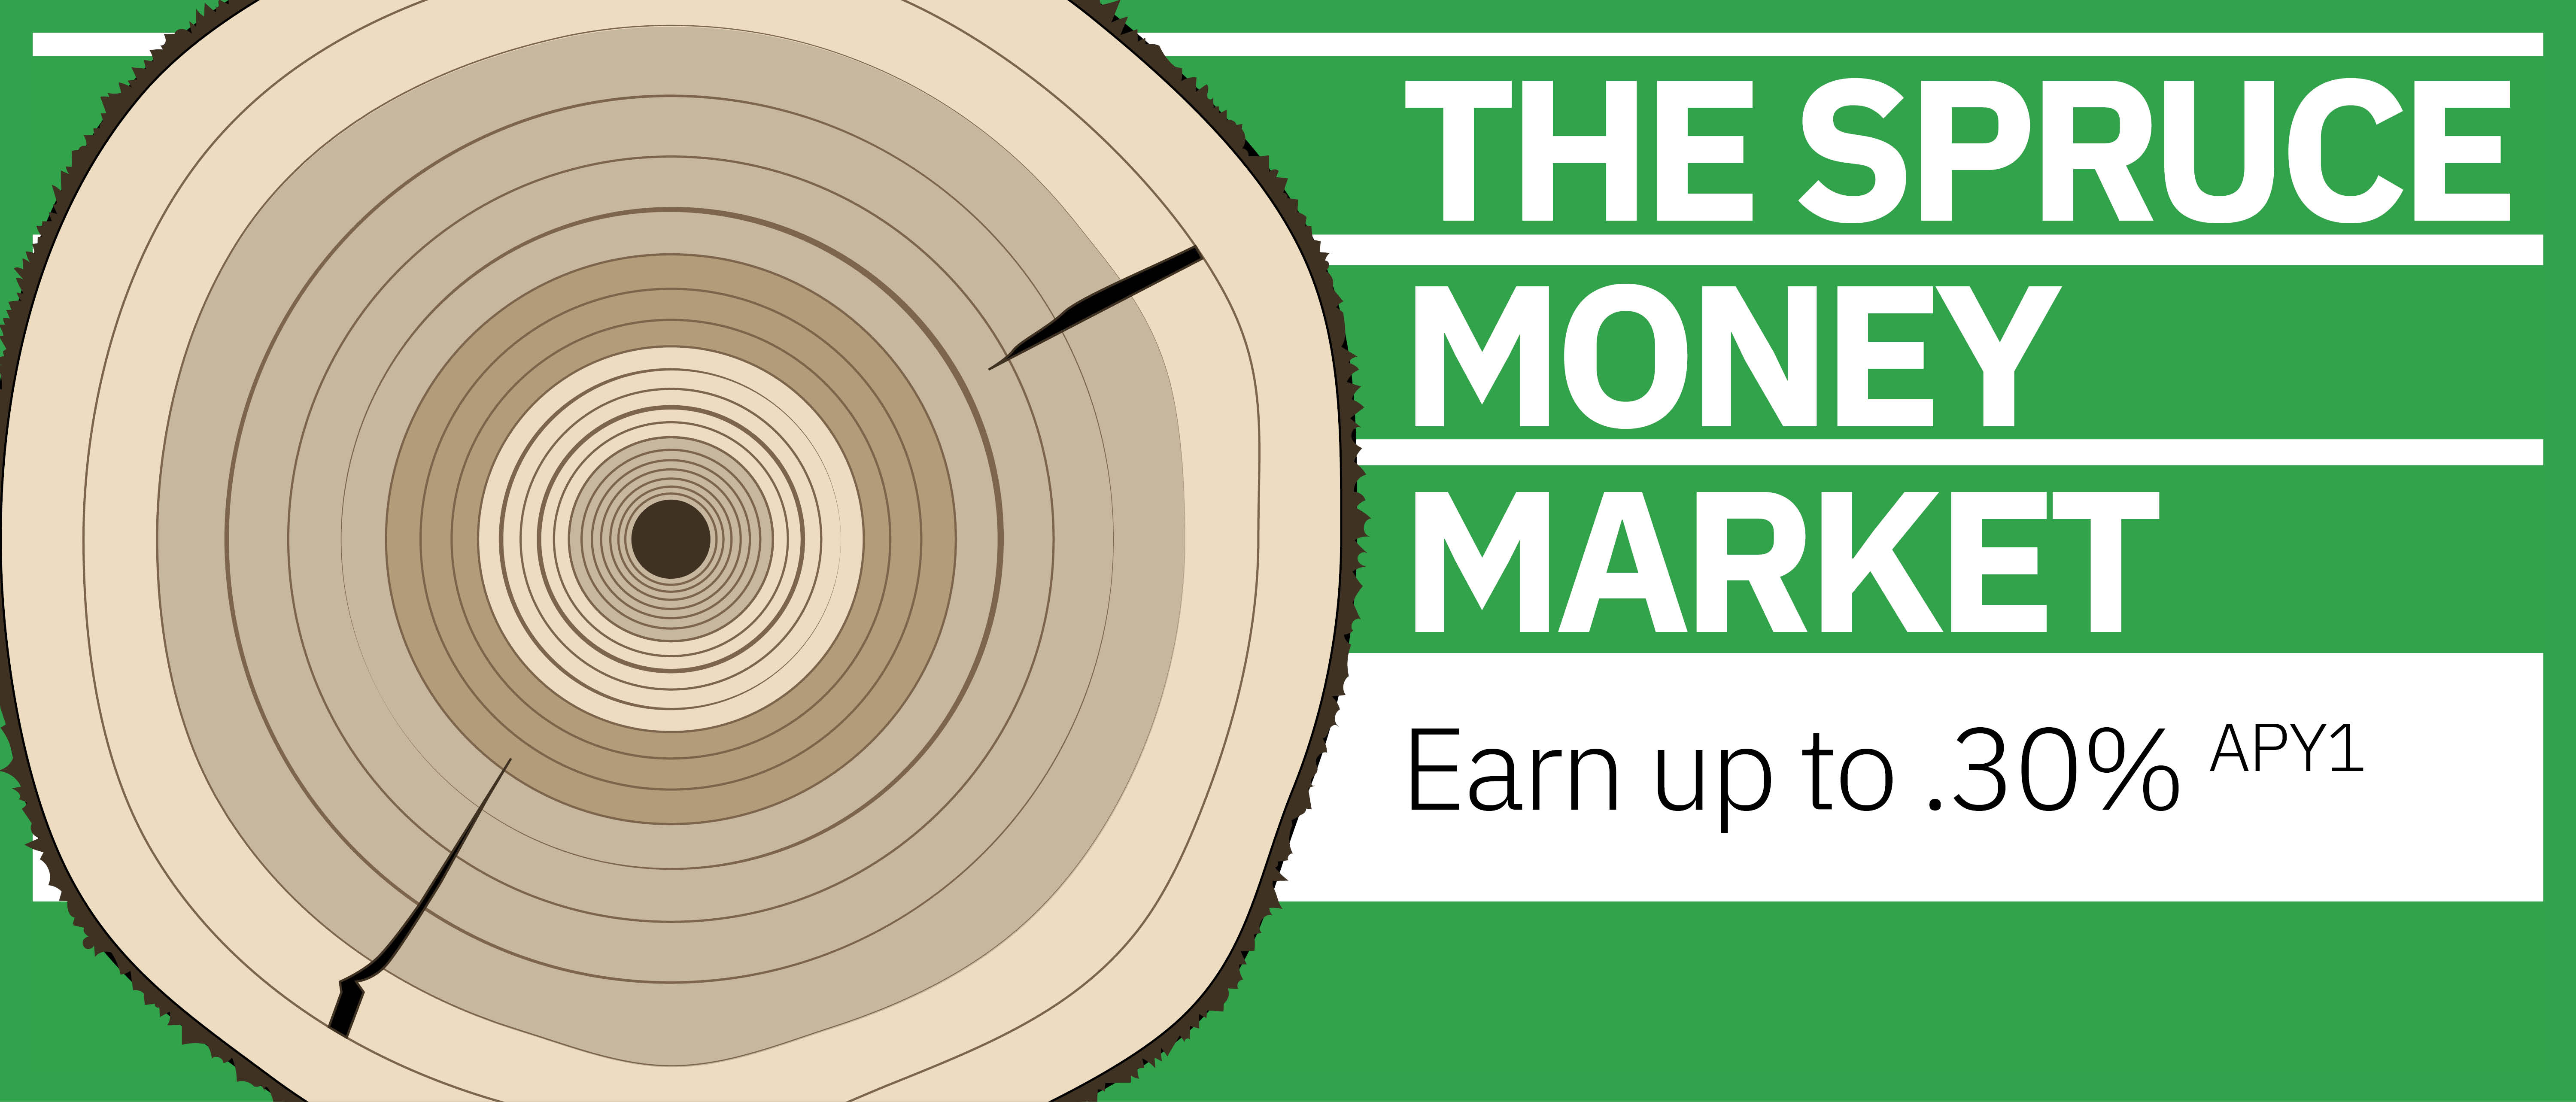 Spruce Money Market Earn up to .30%